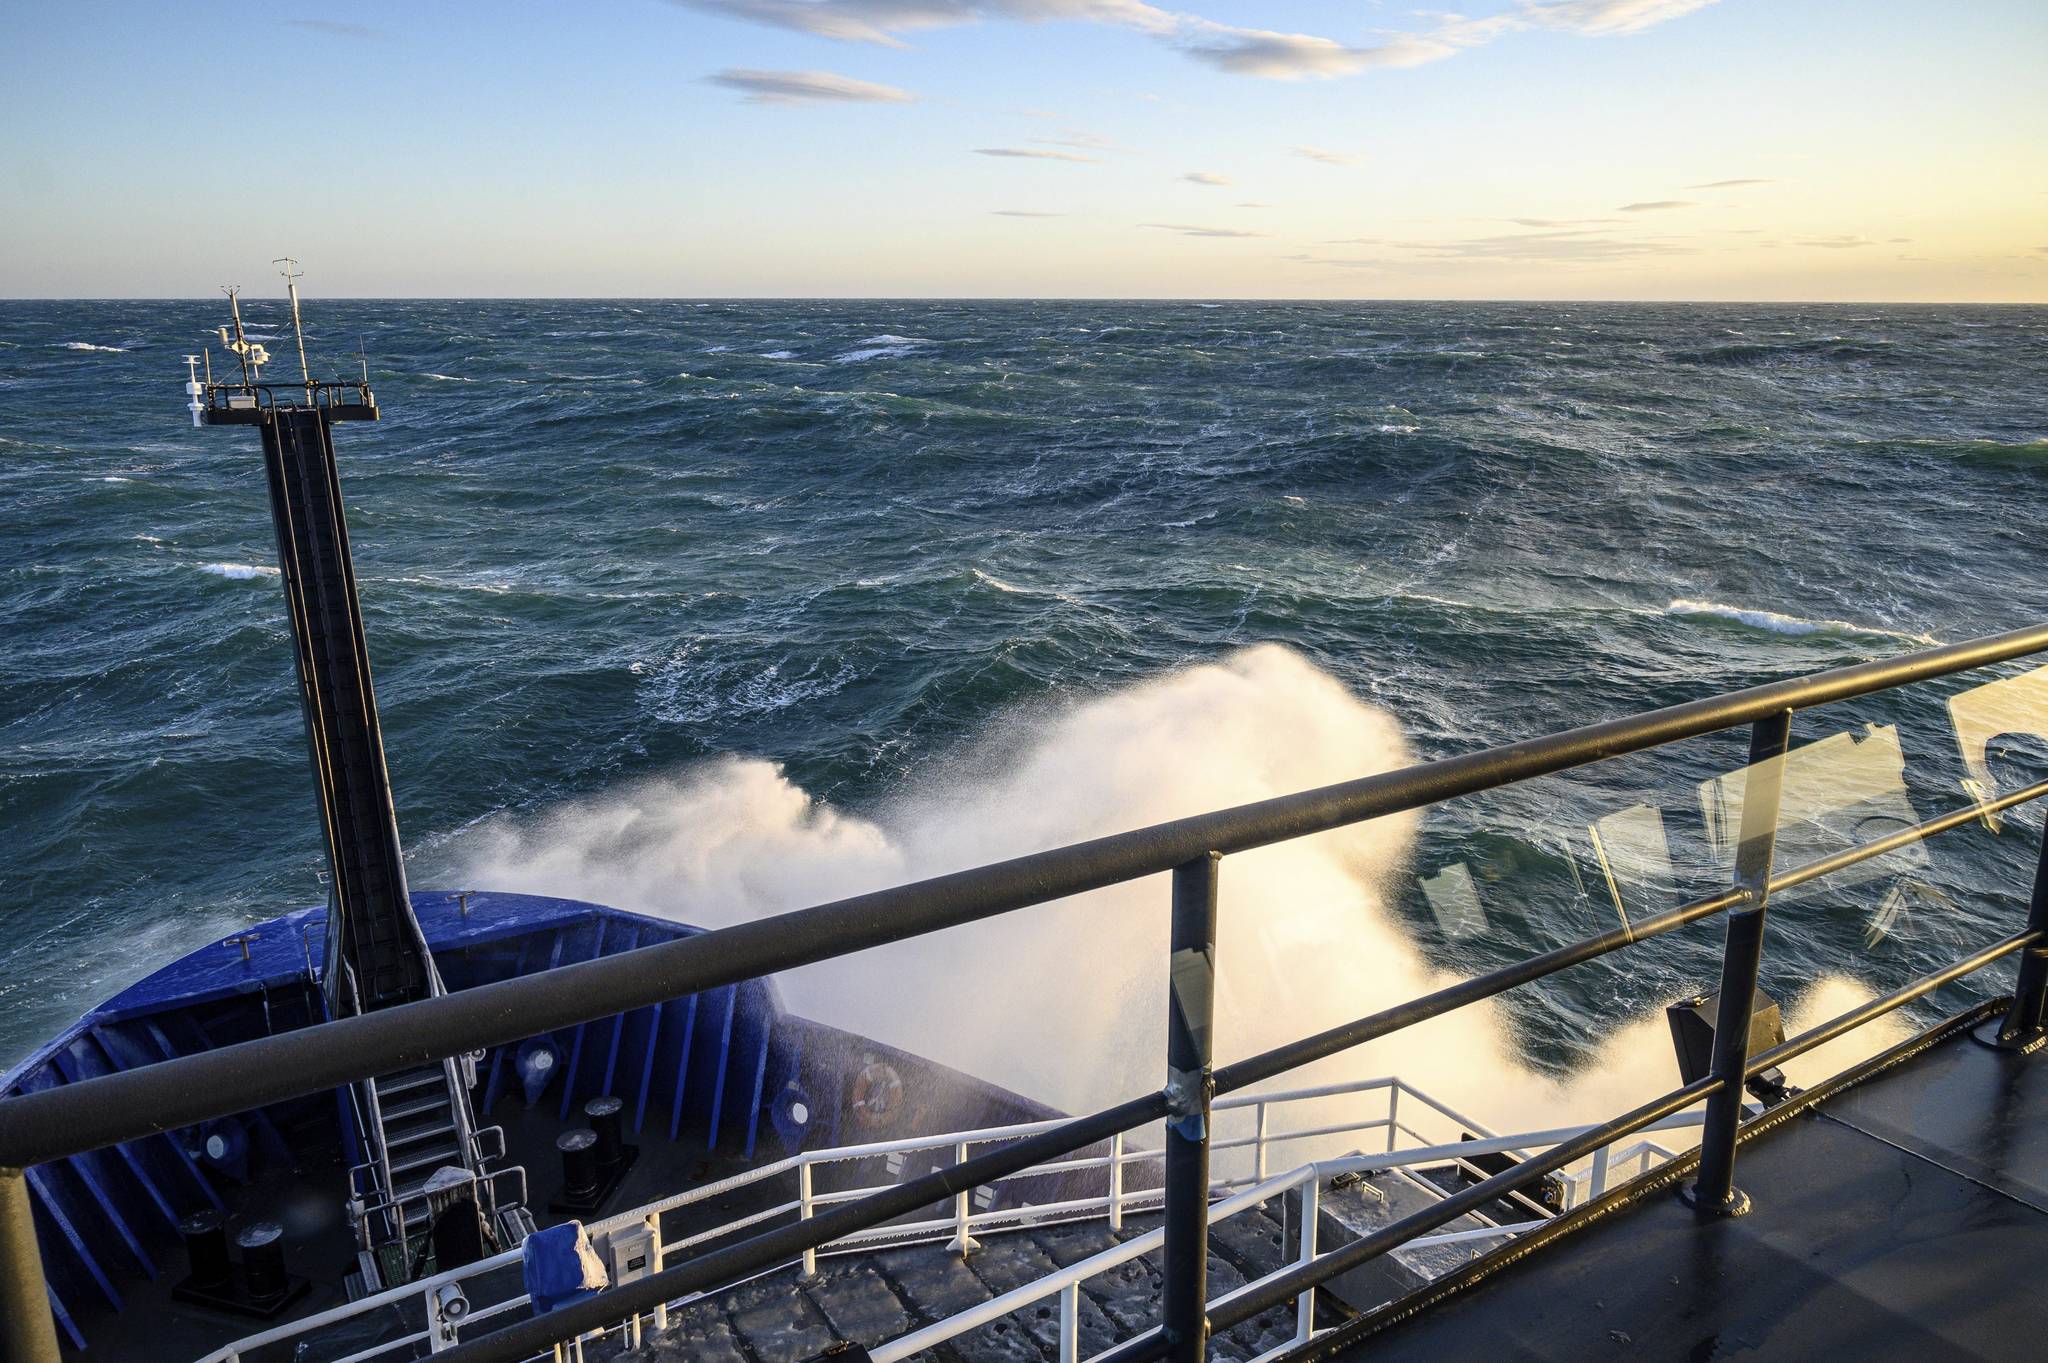 This Nov. 8, 2019 photo provided by John Guillote shows a view from the deck of the Sikuliaq in the Chukchi Sea. University of Washington scientists onboard the research vessel are studying the changes and how less sea ice will affect coastlines, which already are vulnerable to erosion because increased waves delivered by storms. More erosion would increase the chance of winter flooding in villages and danger to hunters in small boats. (John Guillote via AP)